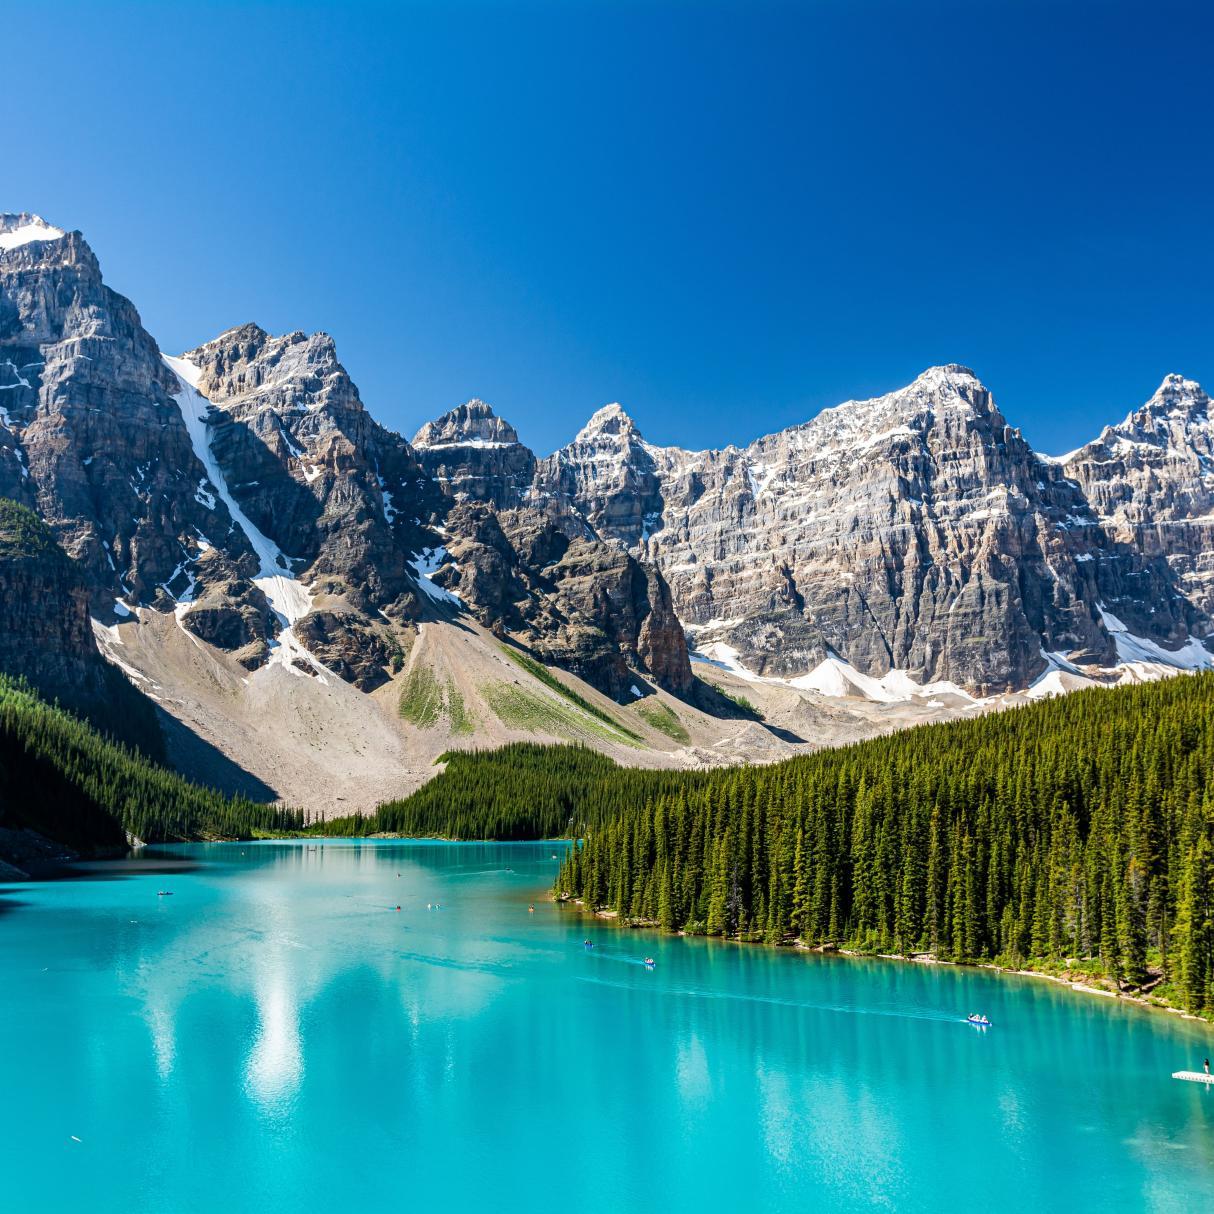 Crystal blue lake with mountains above